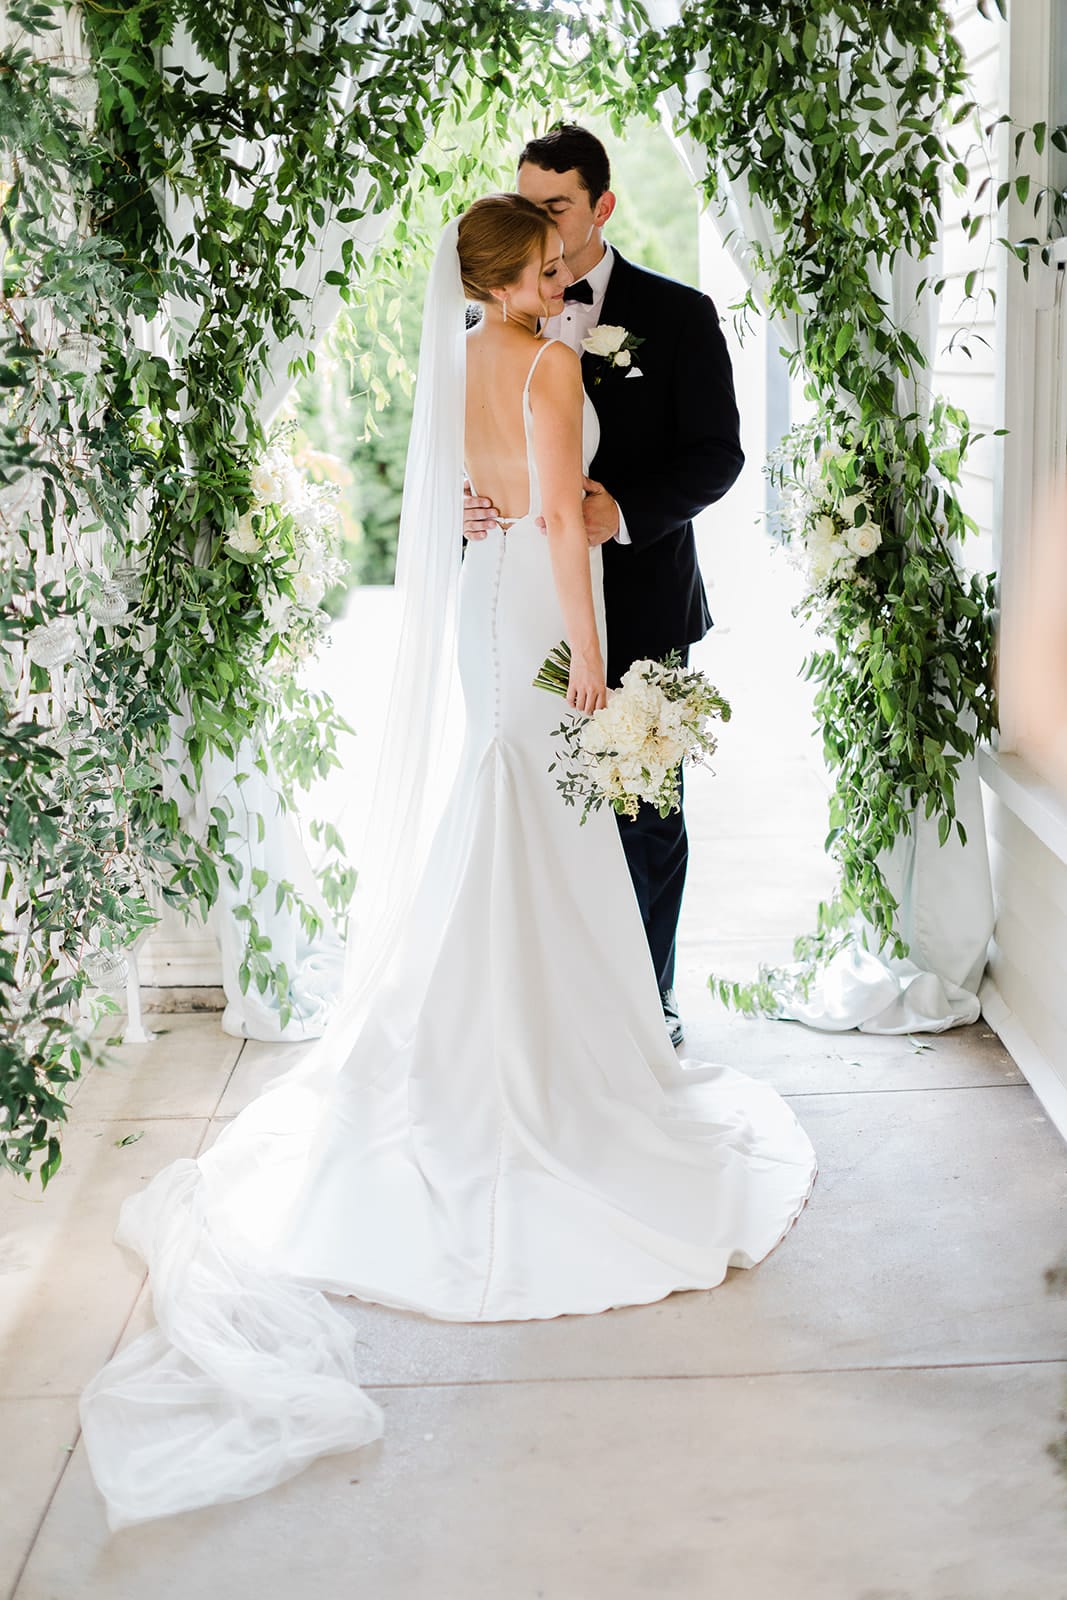 Simple garden wedding inspiration with neutral colors of ivory and gold